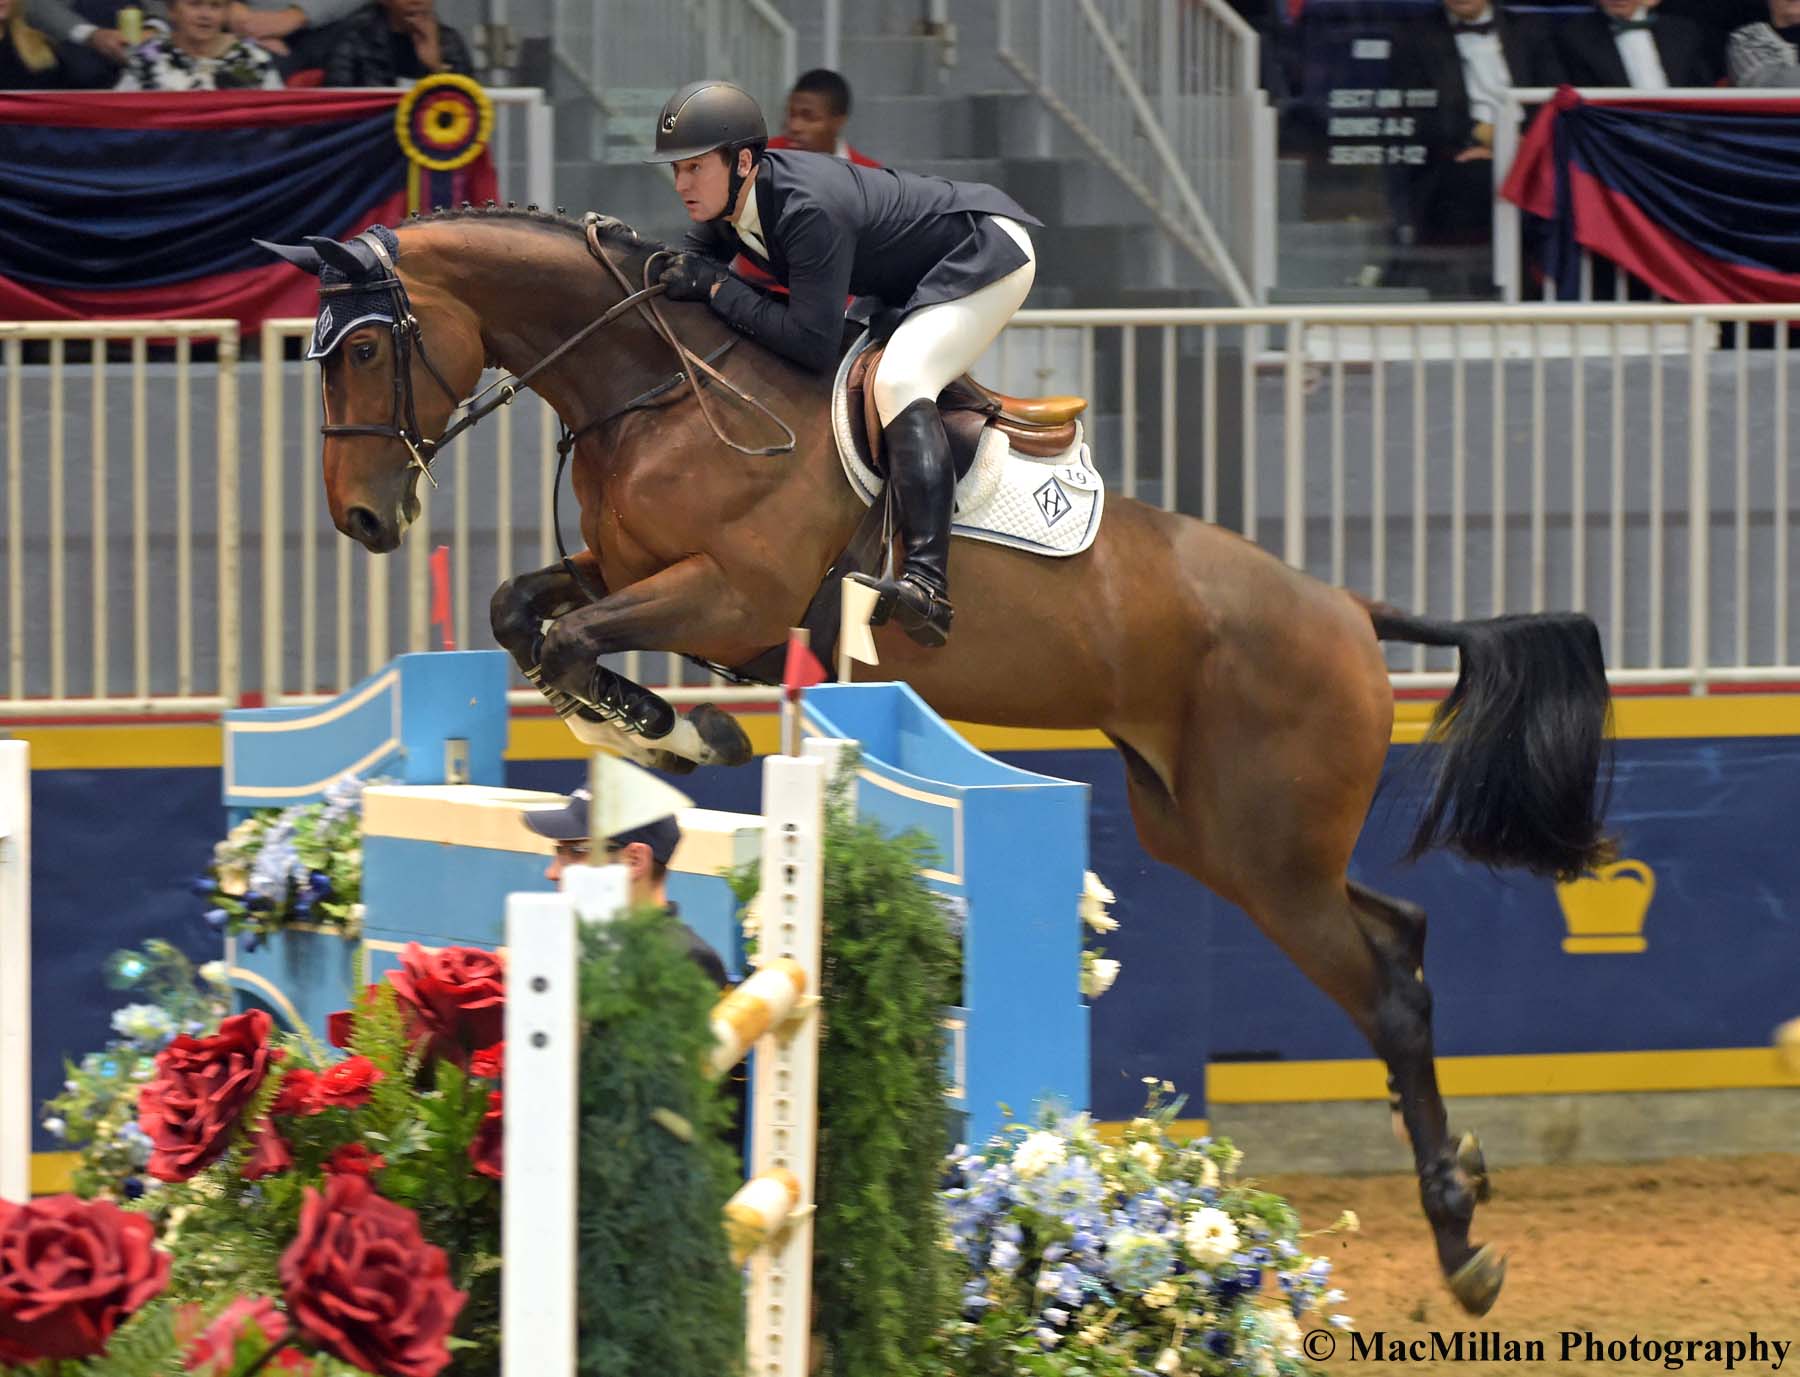 Photo 1 – International jumper star McLain Ward, Brewster, New York, lists the Royal Horse Show as one of his favorite events all year. He was named the Best International Jumper Rider at the 2015 Royal after winning four classes including the World Cup class with HH Azur, owned by Double H Farms in Florida.Photo by Kim MacMillan/MacMillan Photography